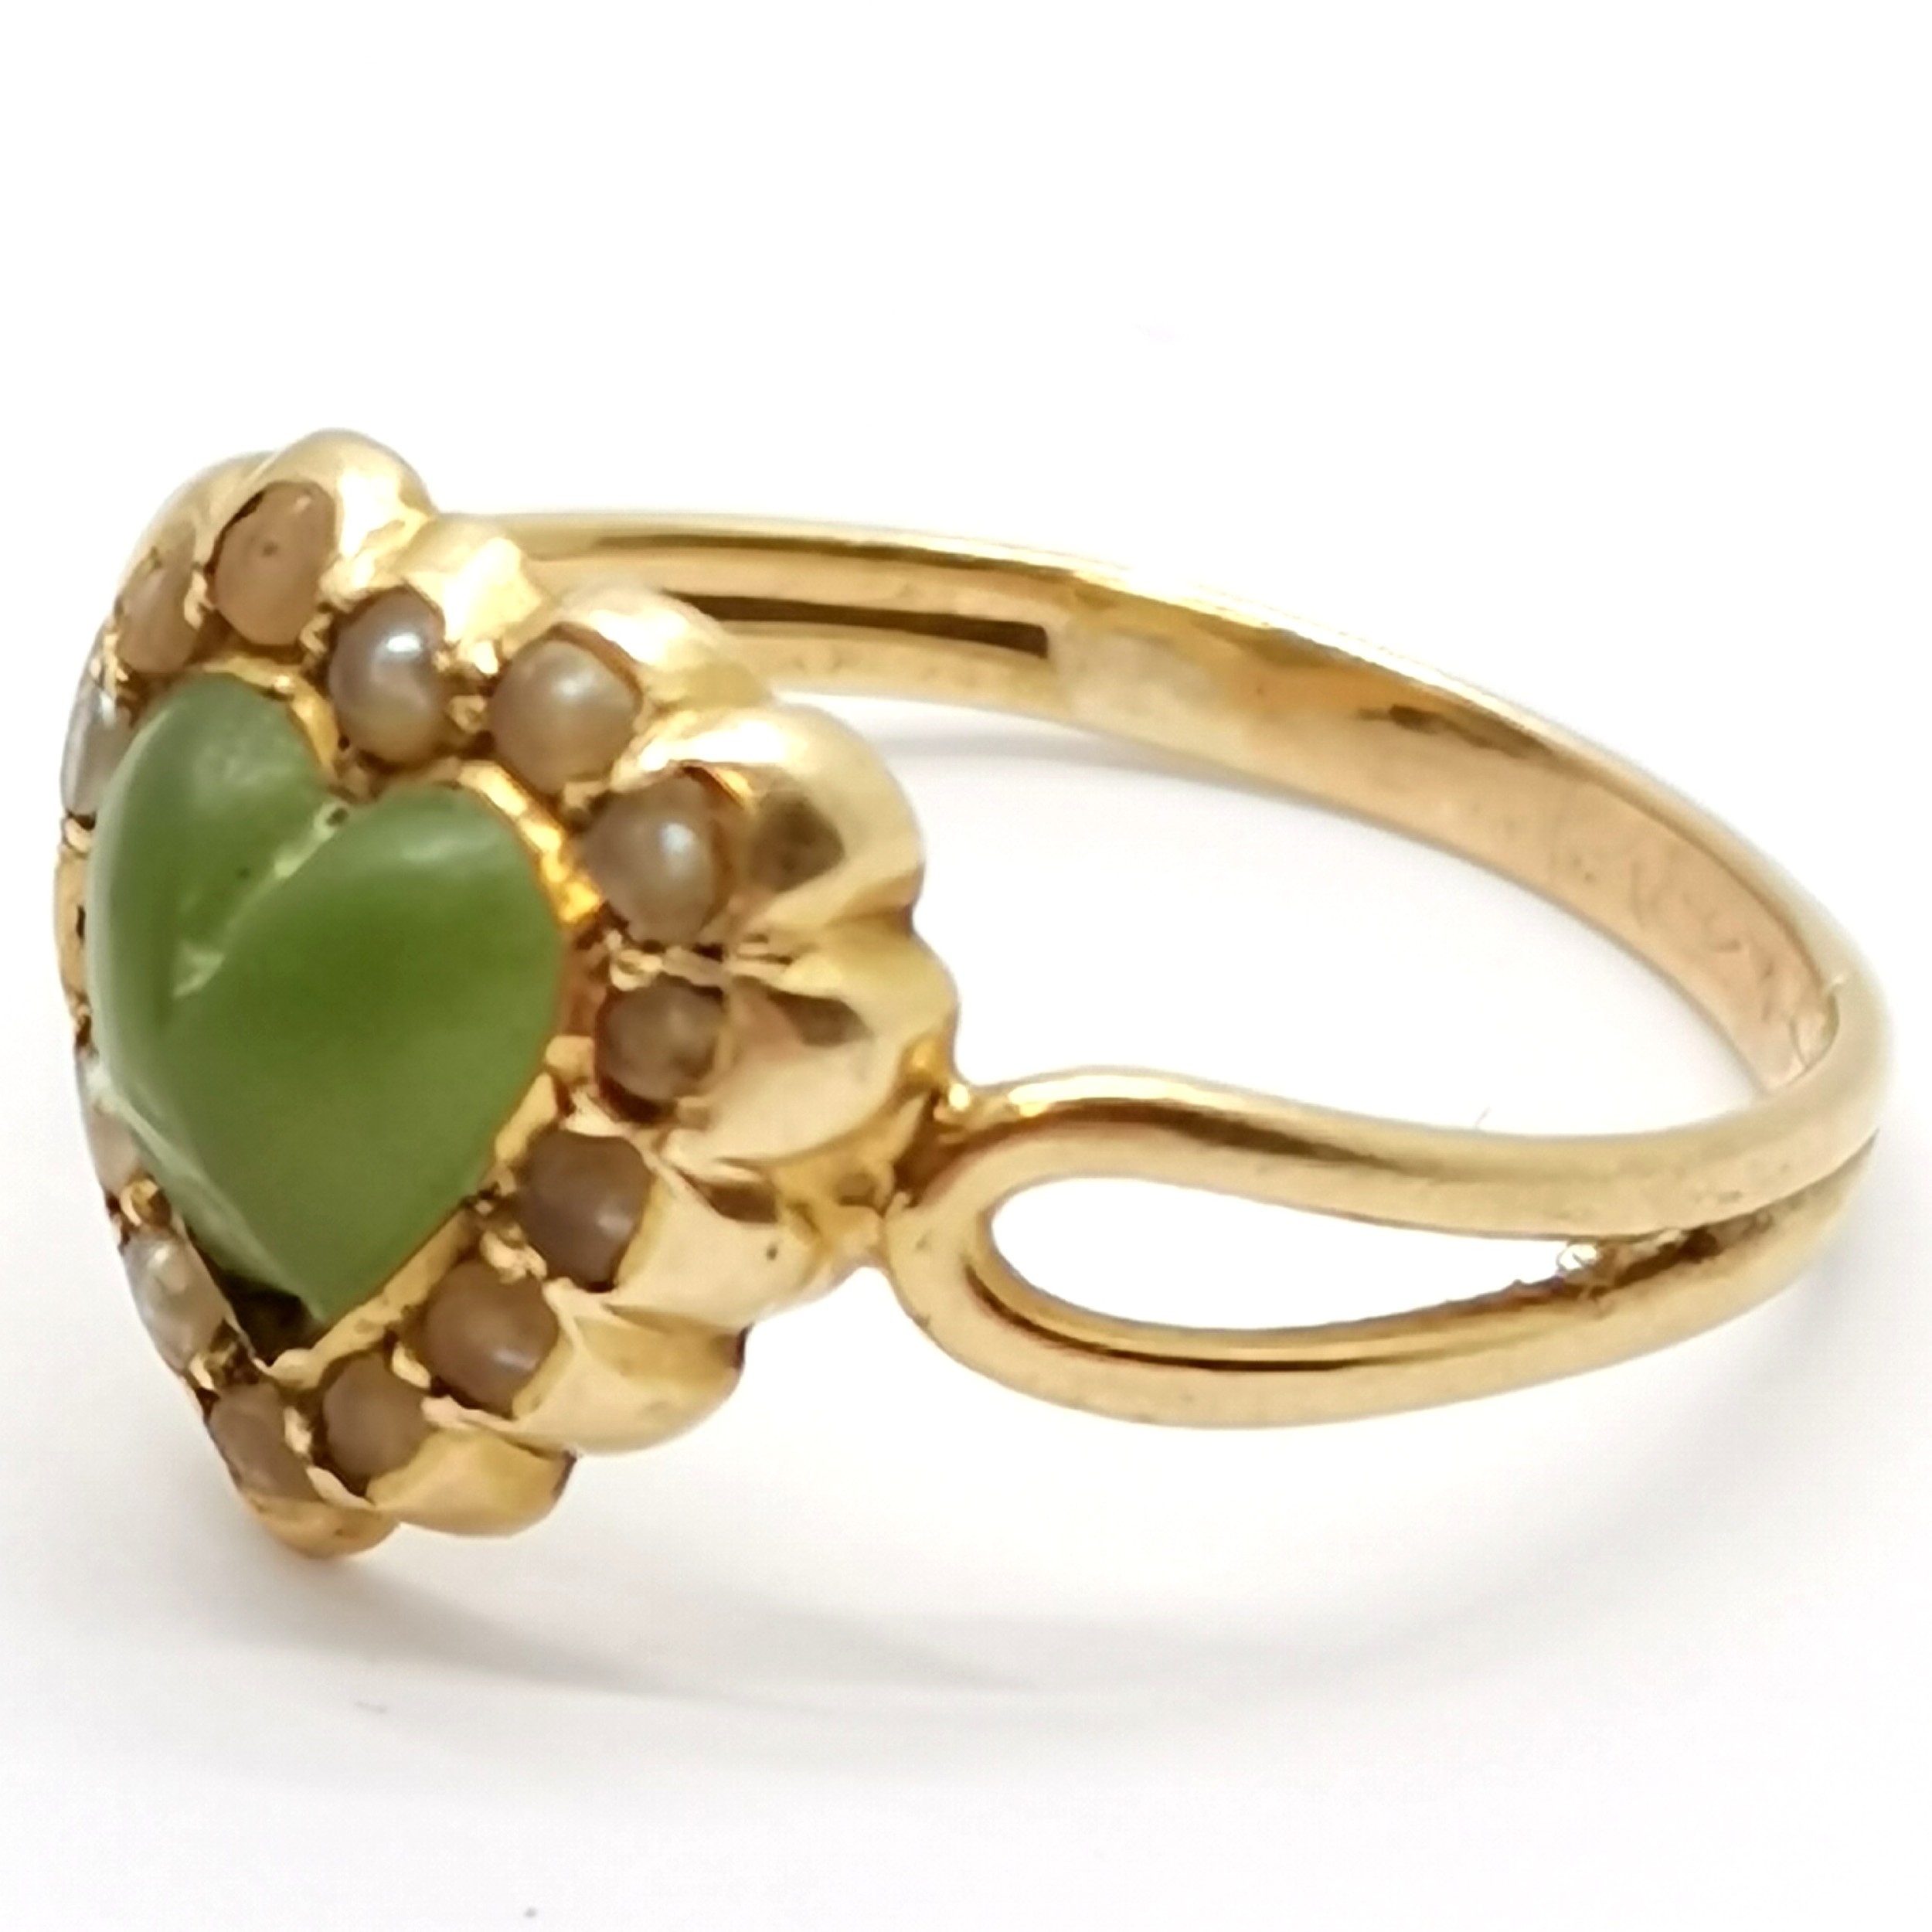 Antique unmarked gold ring with heart shaped green stone with pearl surround (missing 1 pearl) - - Image 4 of 4